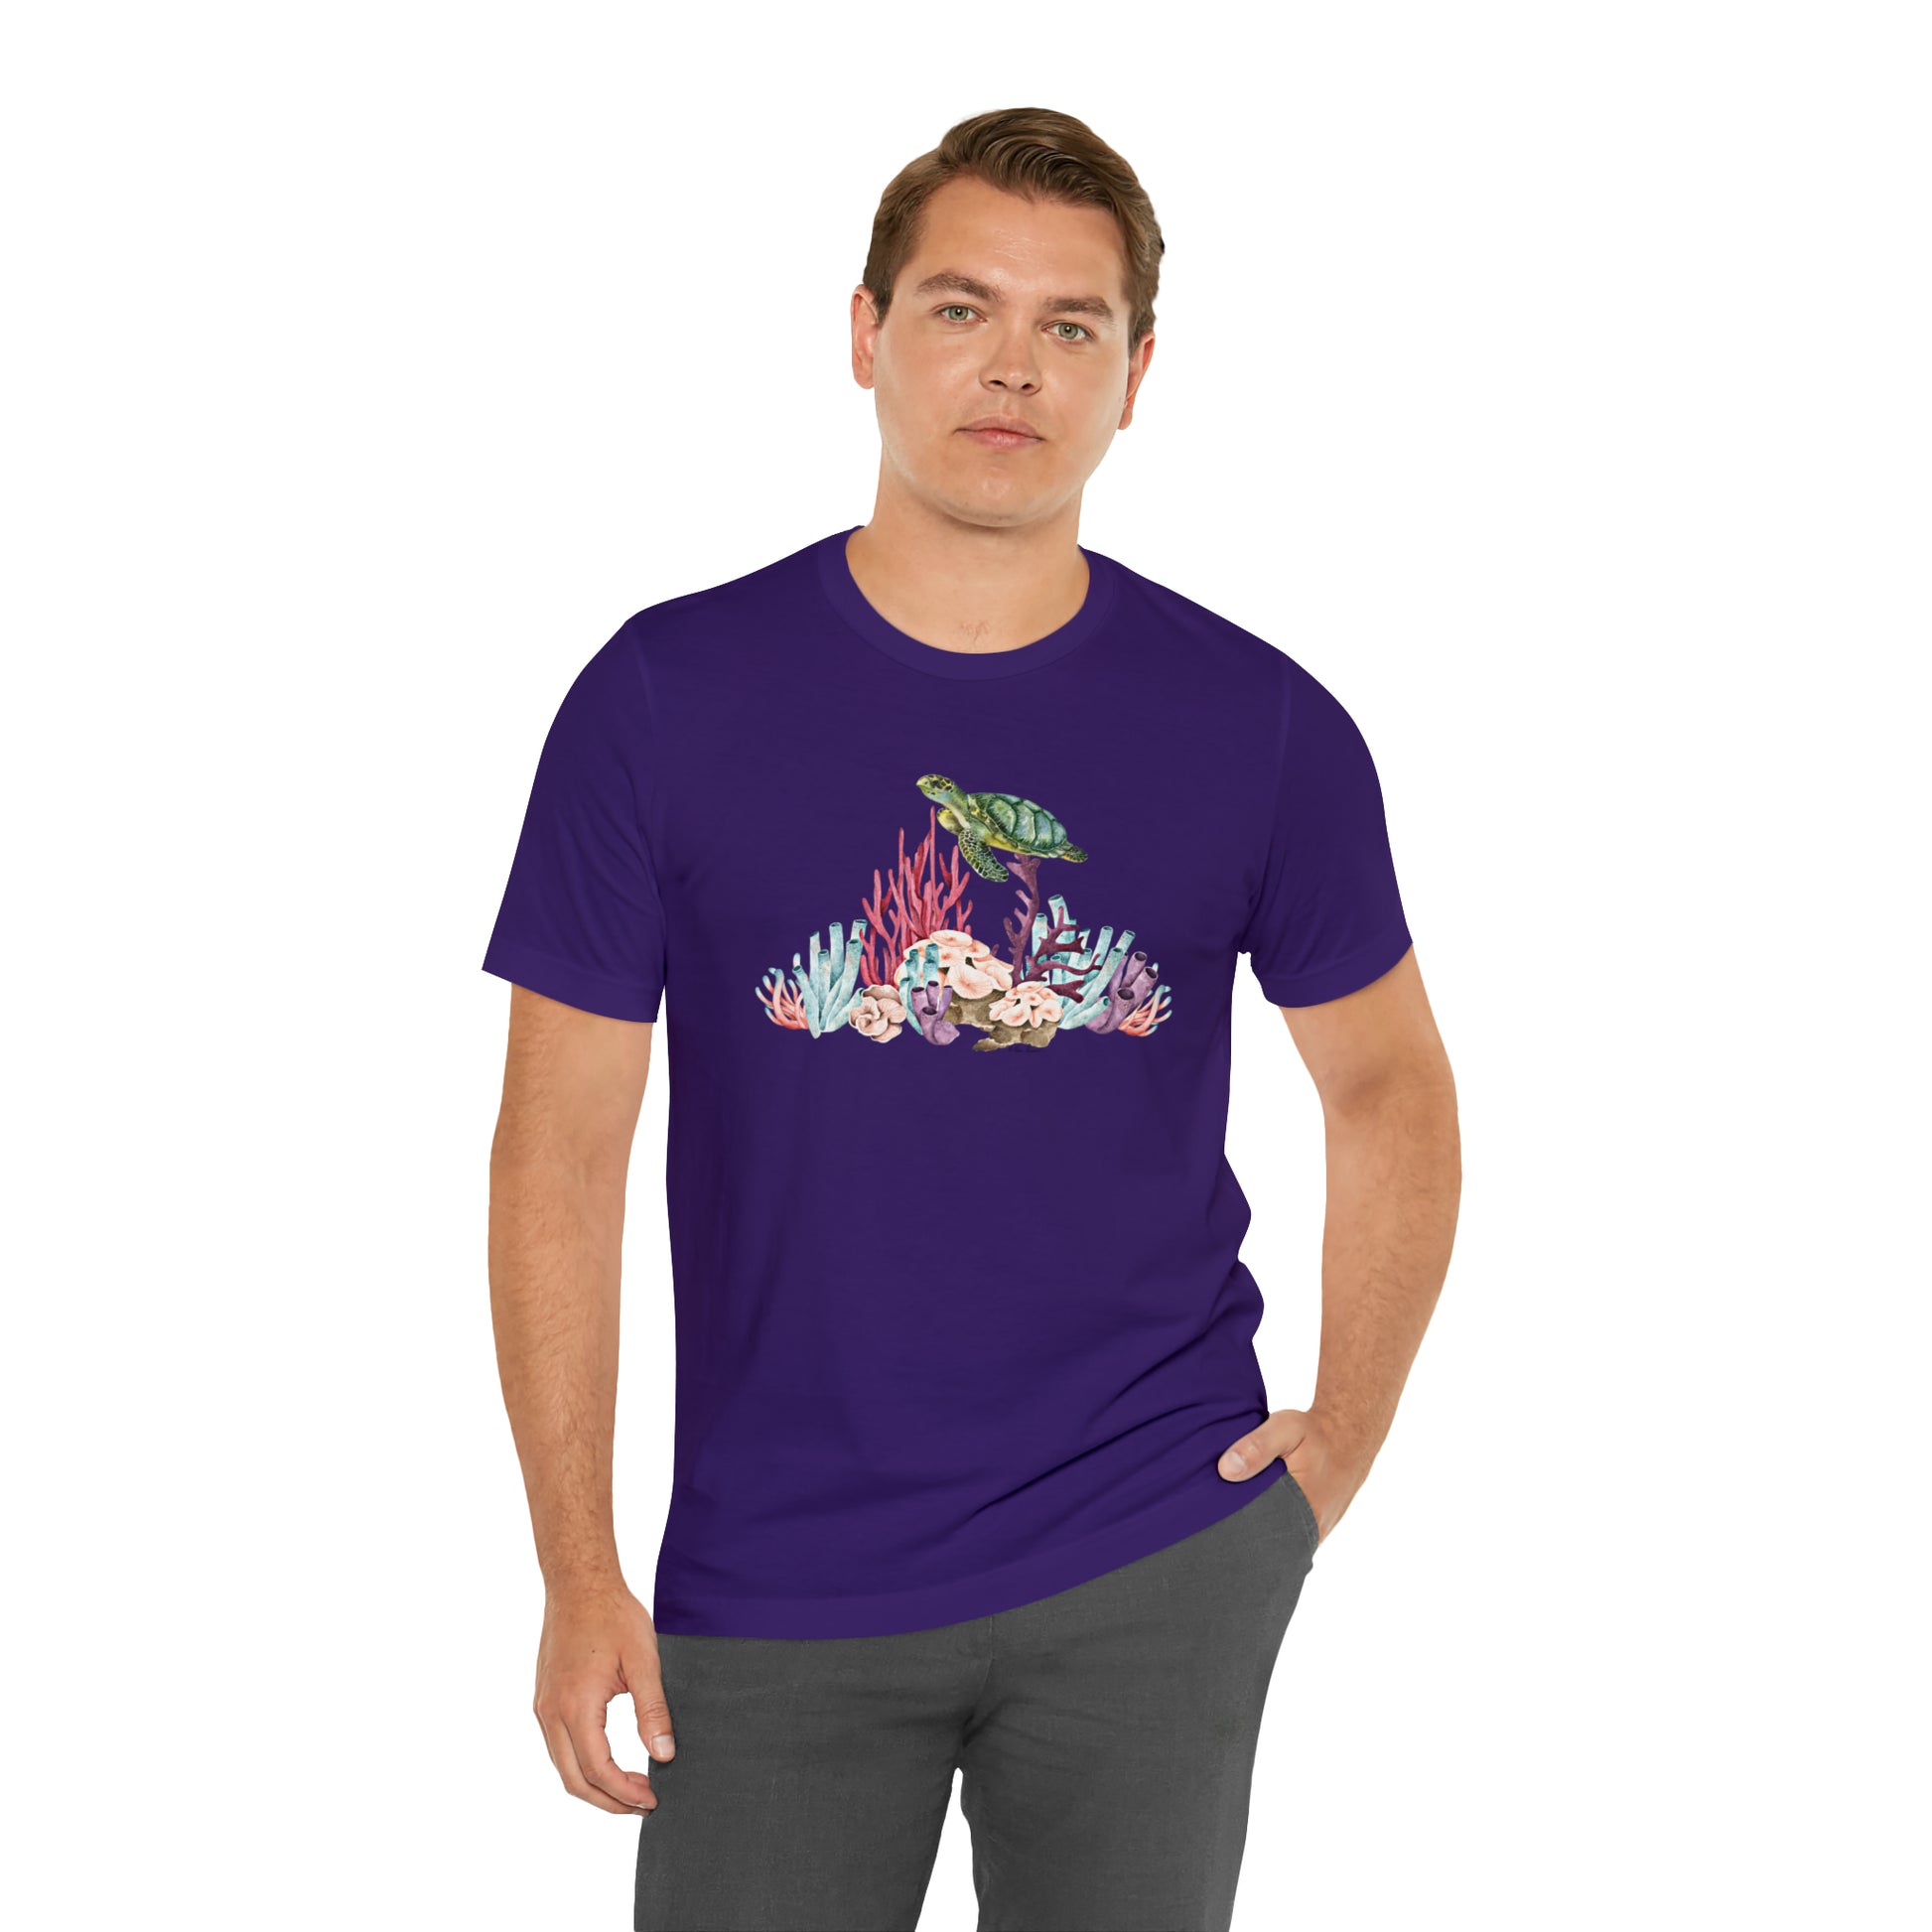 Mock up of a man wearing the purple shirt